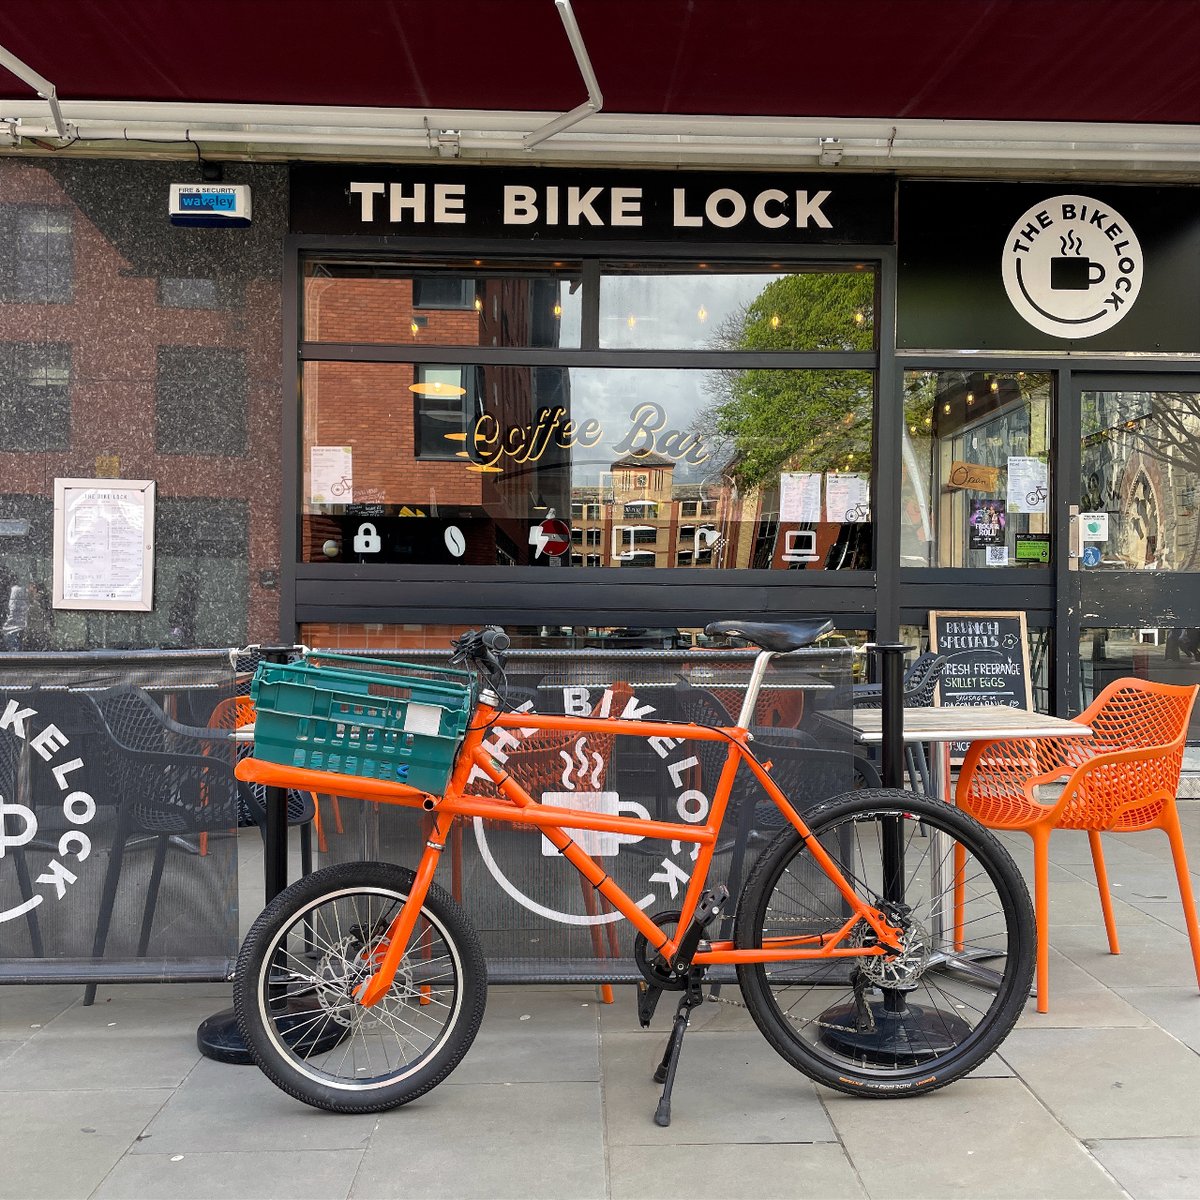 Check out our delivery bike, we pick up our produce fresh each morning from Cardiff market!🚲🧡 #thebikelock #bikestorage #cycletowork #coffeeshop #itsallaboutpeople #shoplocal #cardiffmarket